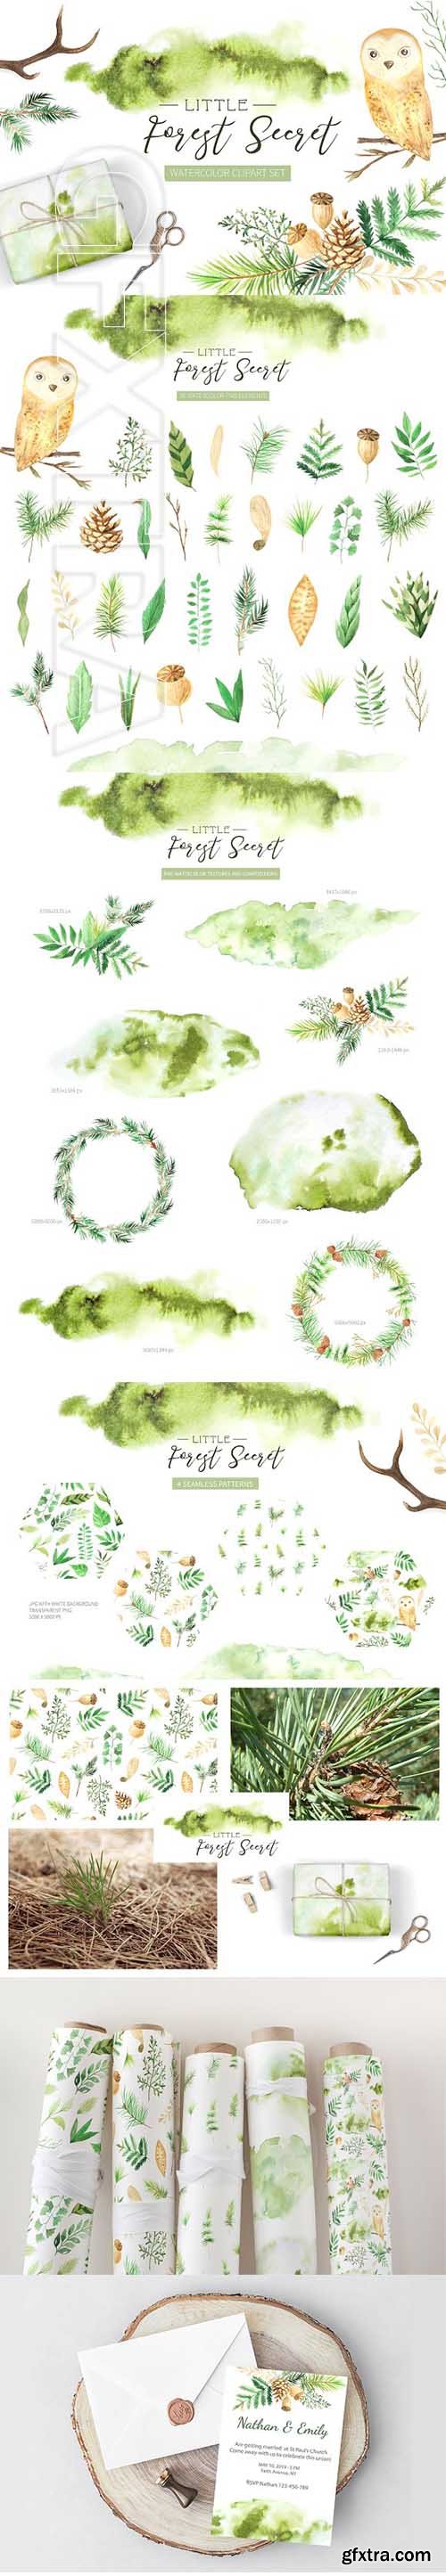 CreativeMarket - Watercolor Forest Graphic Set 2416370